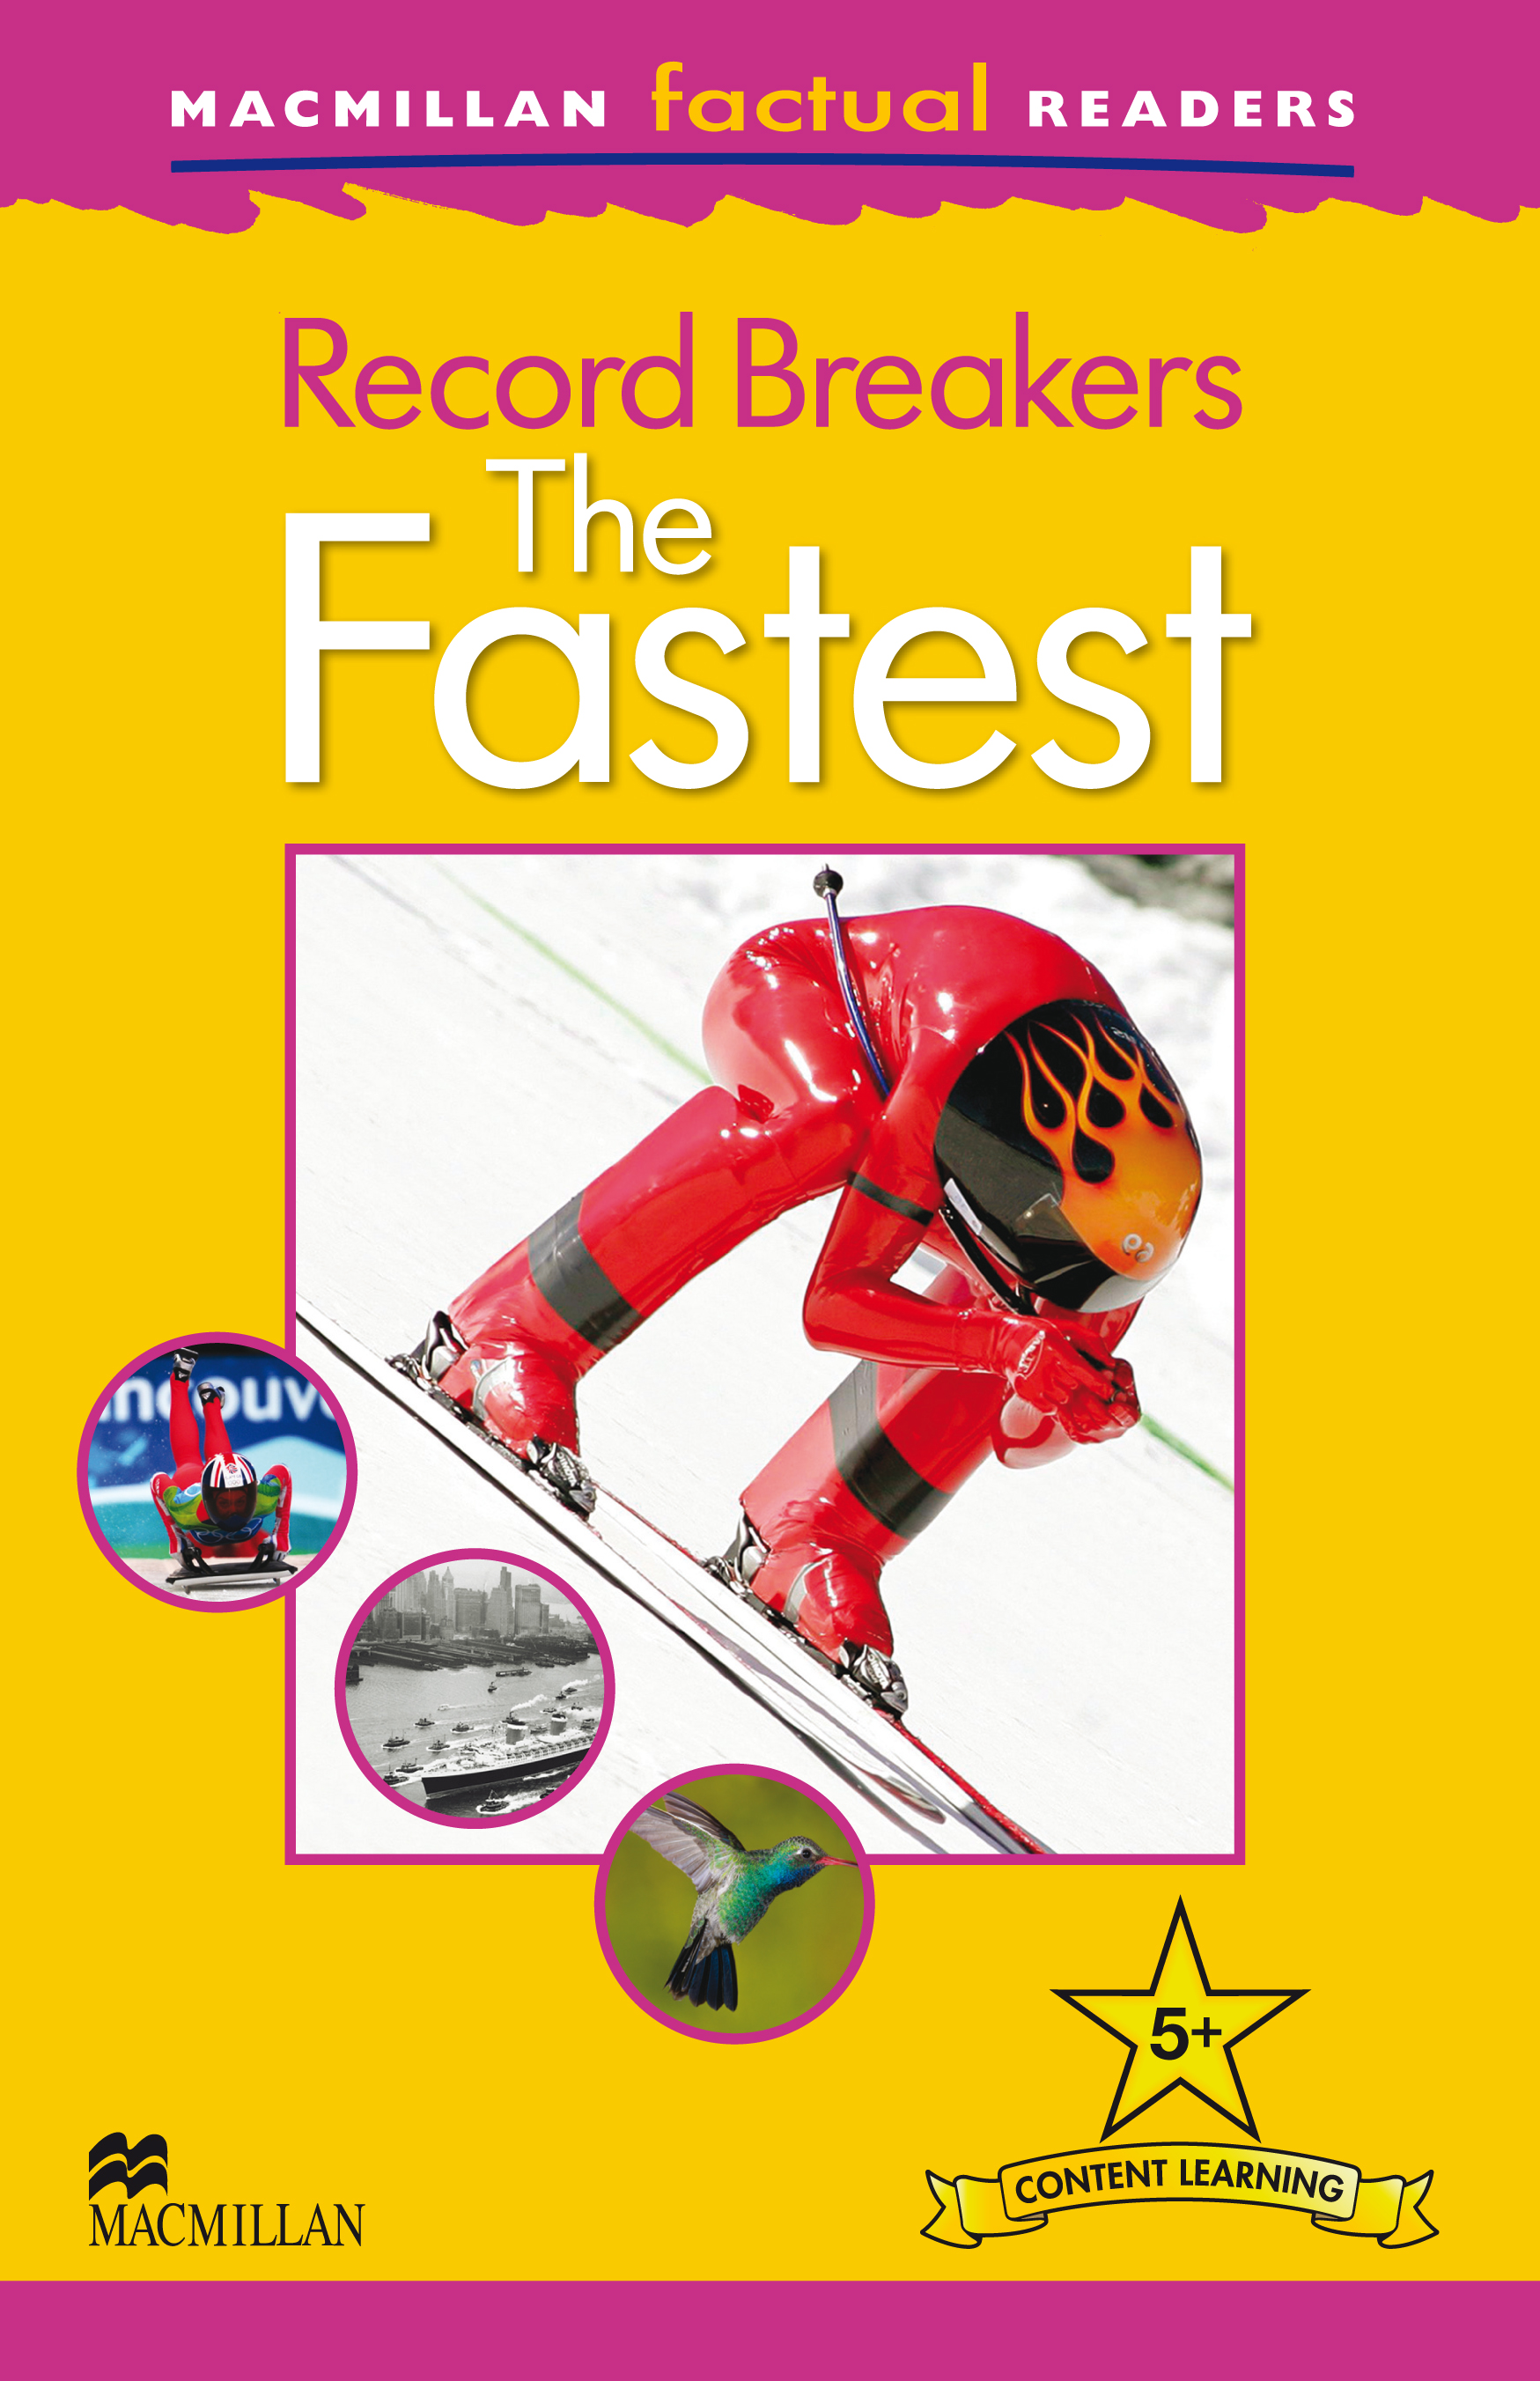 Record Breakers - The Fastest